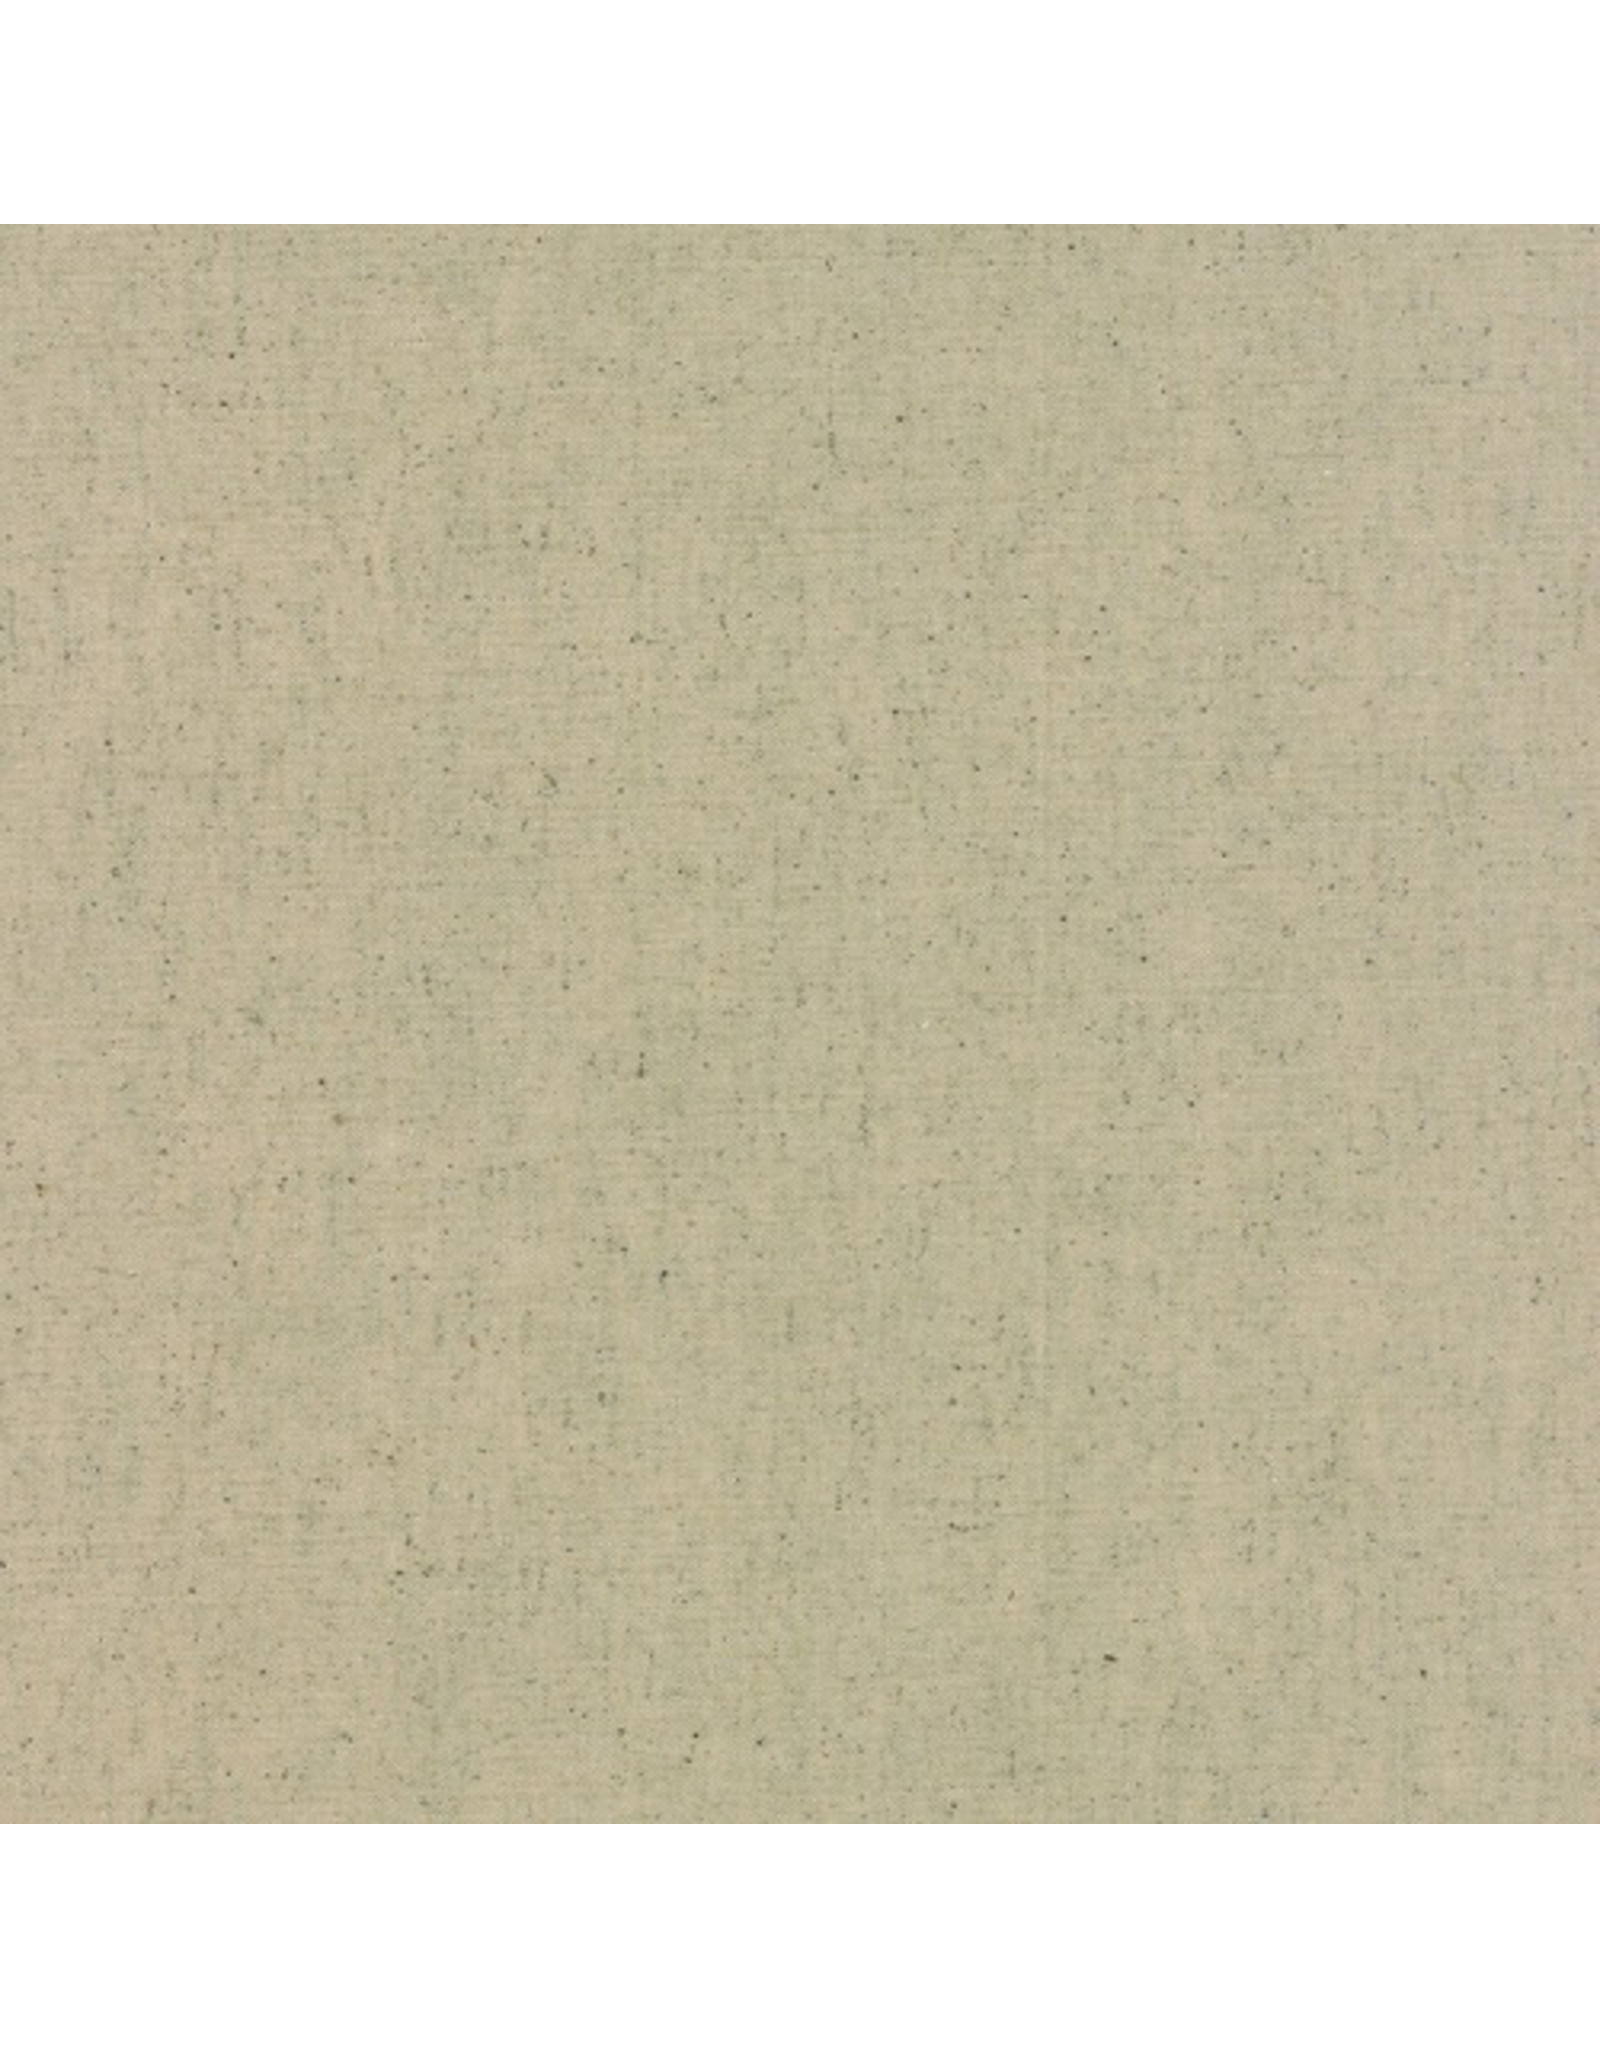 Moda Linen Mochi Solid in Unbleached Natural, Fabric Half-Yards